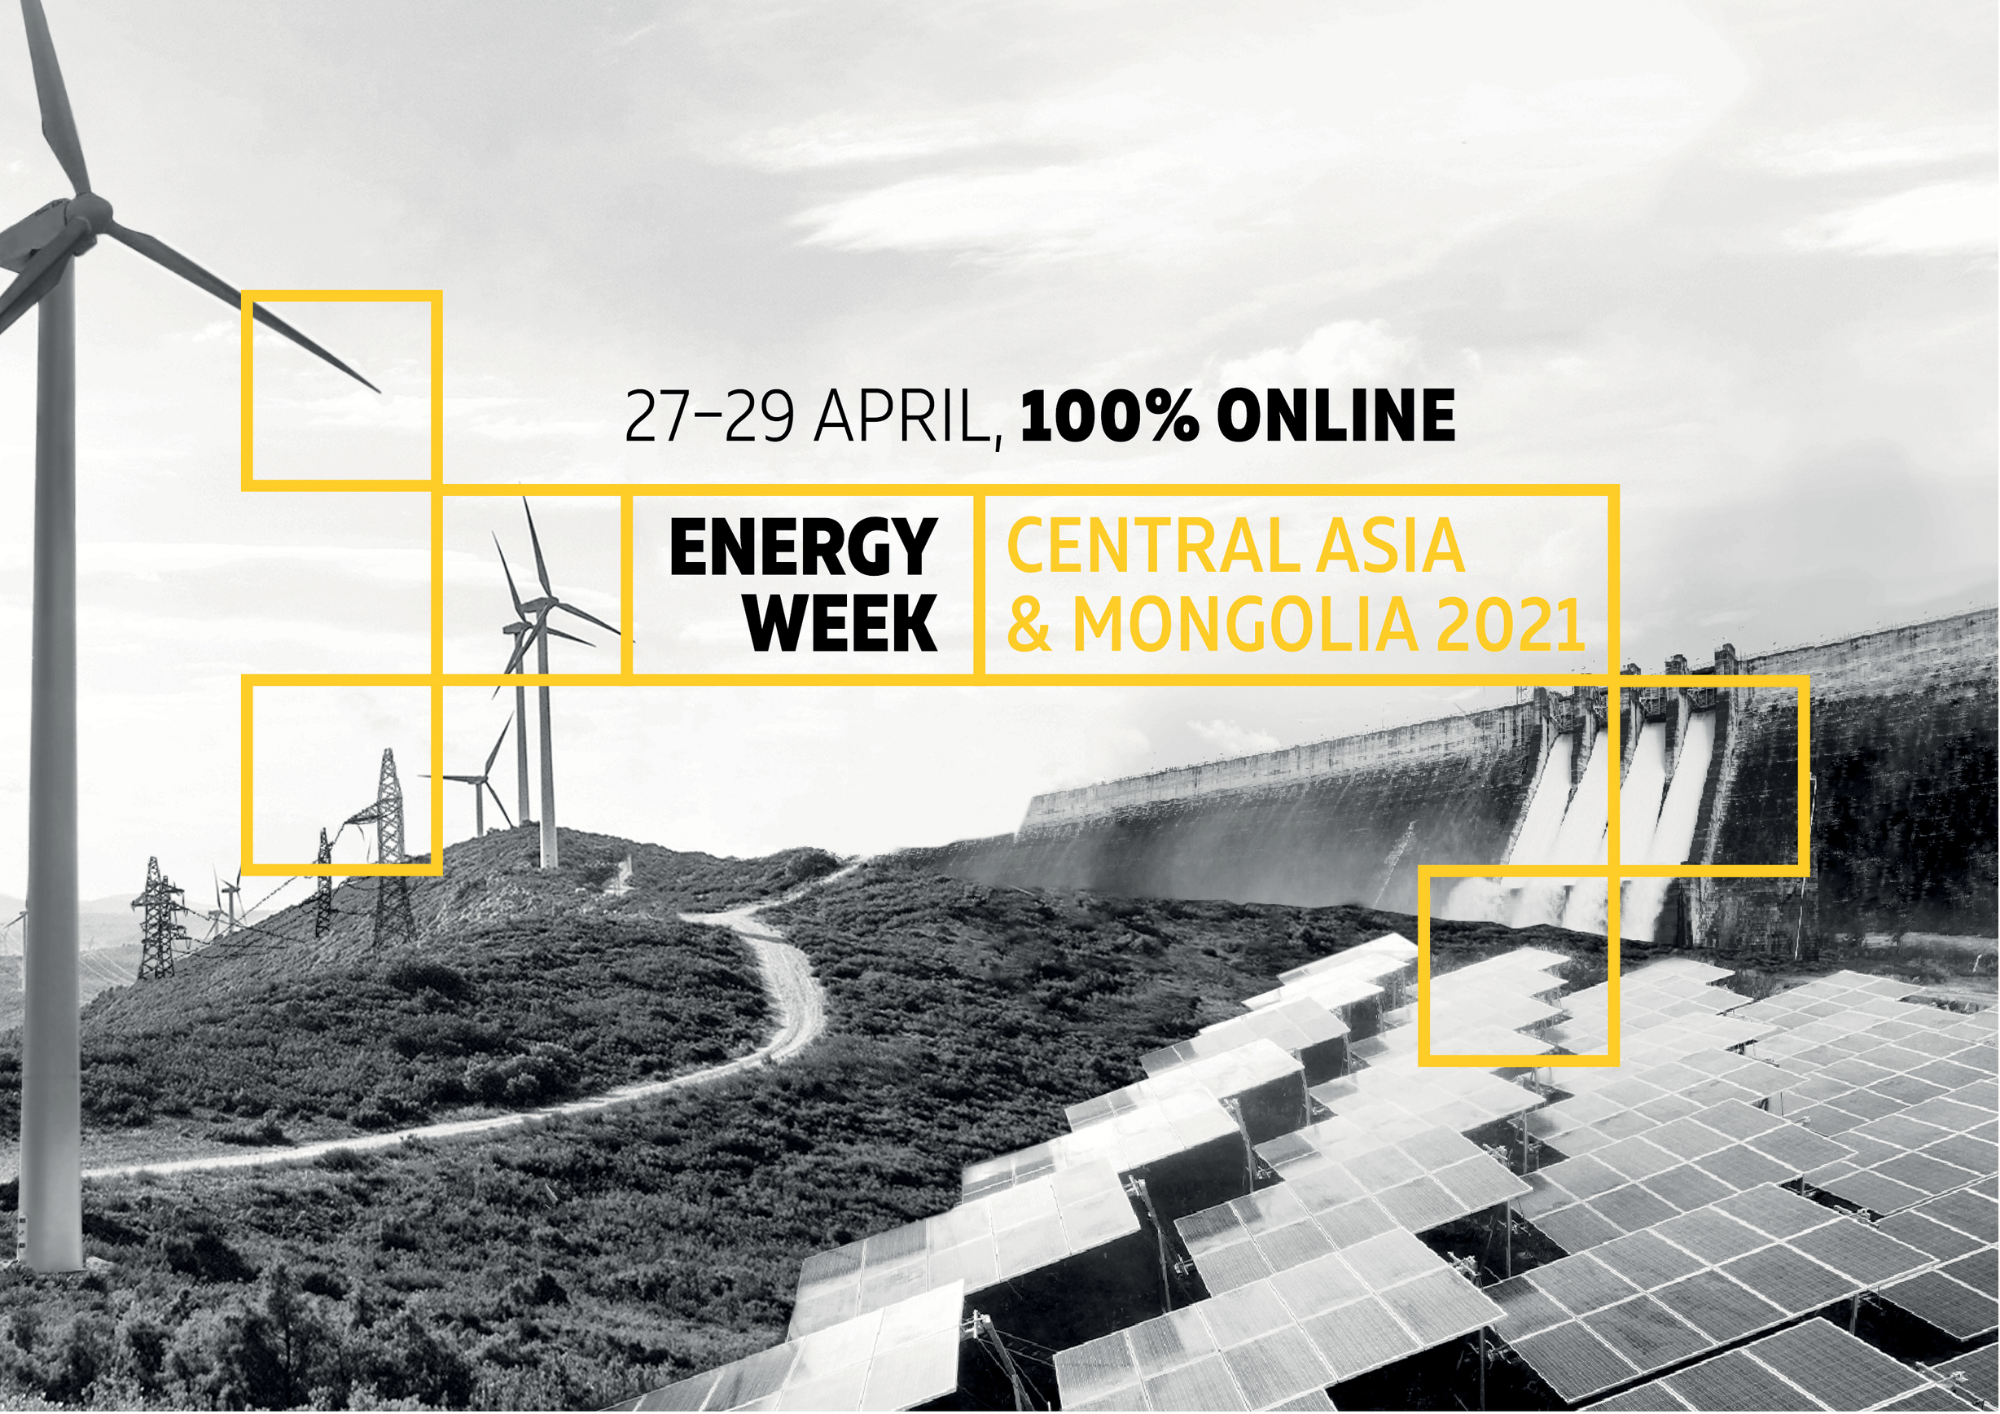 Energy Week Central Asia & Mongolia 2021 